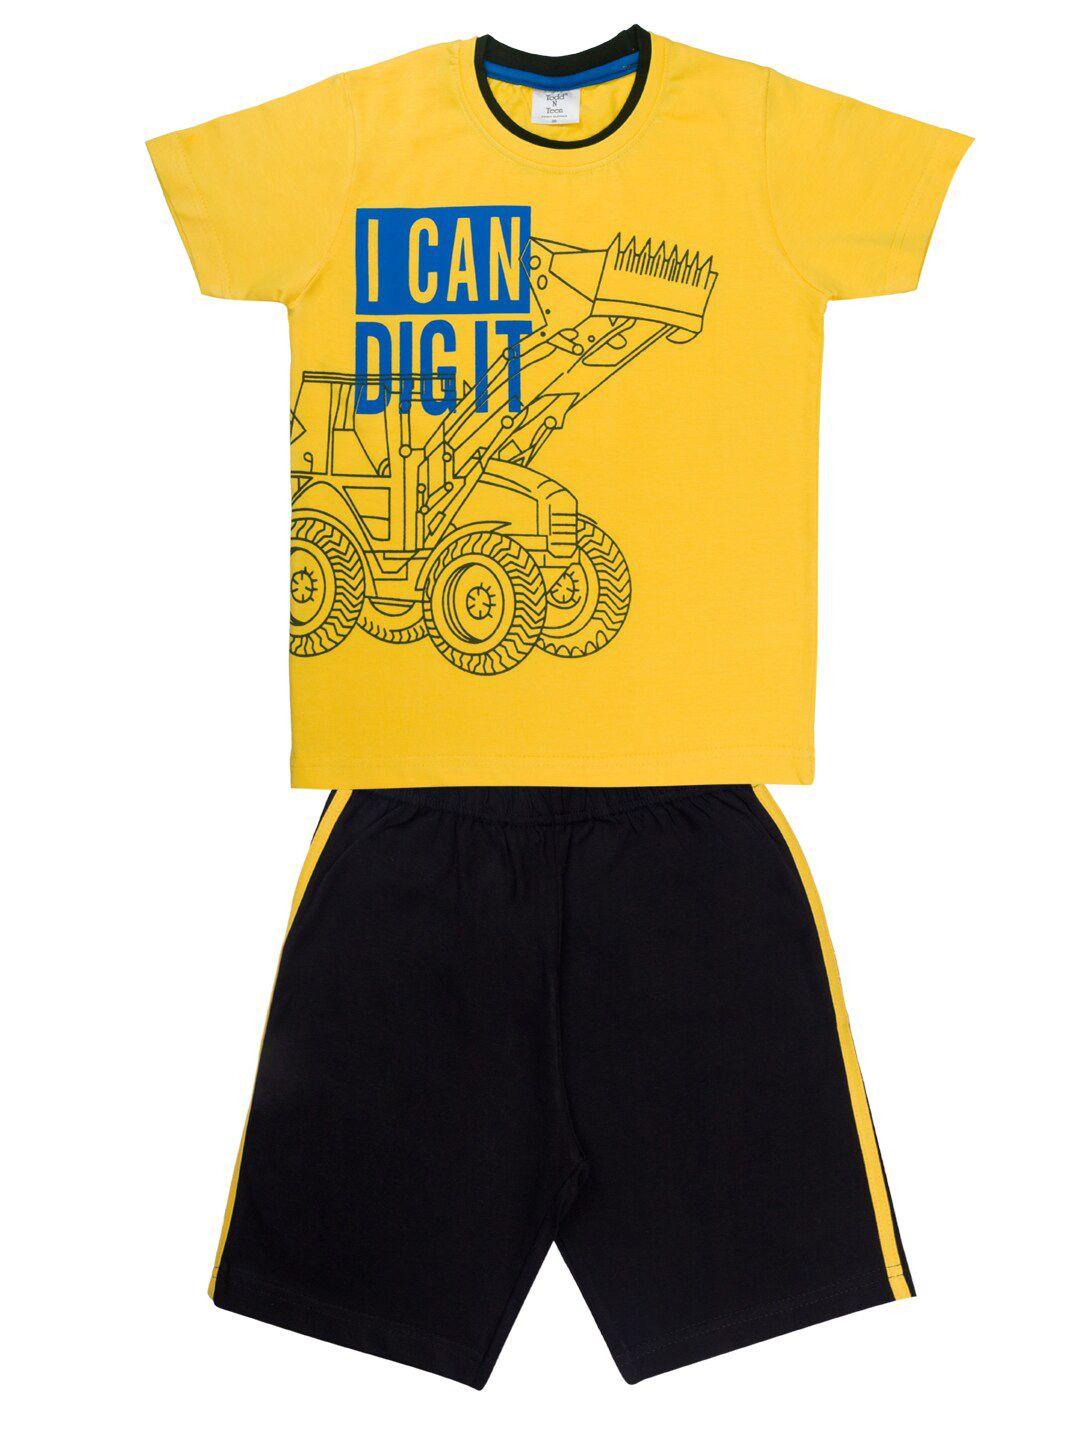 todd n teen boys yellow & black printed pure cotton t-shirt with shorts